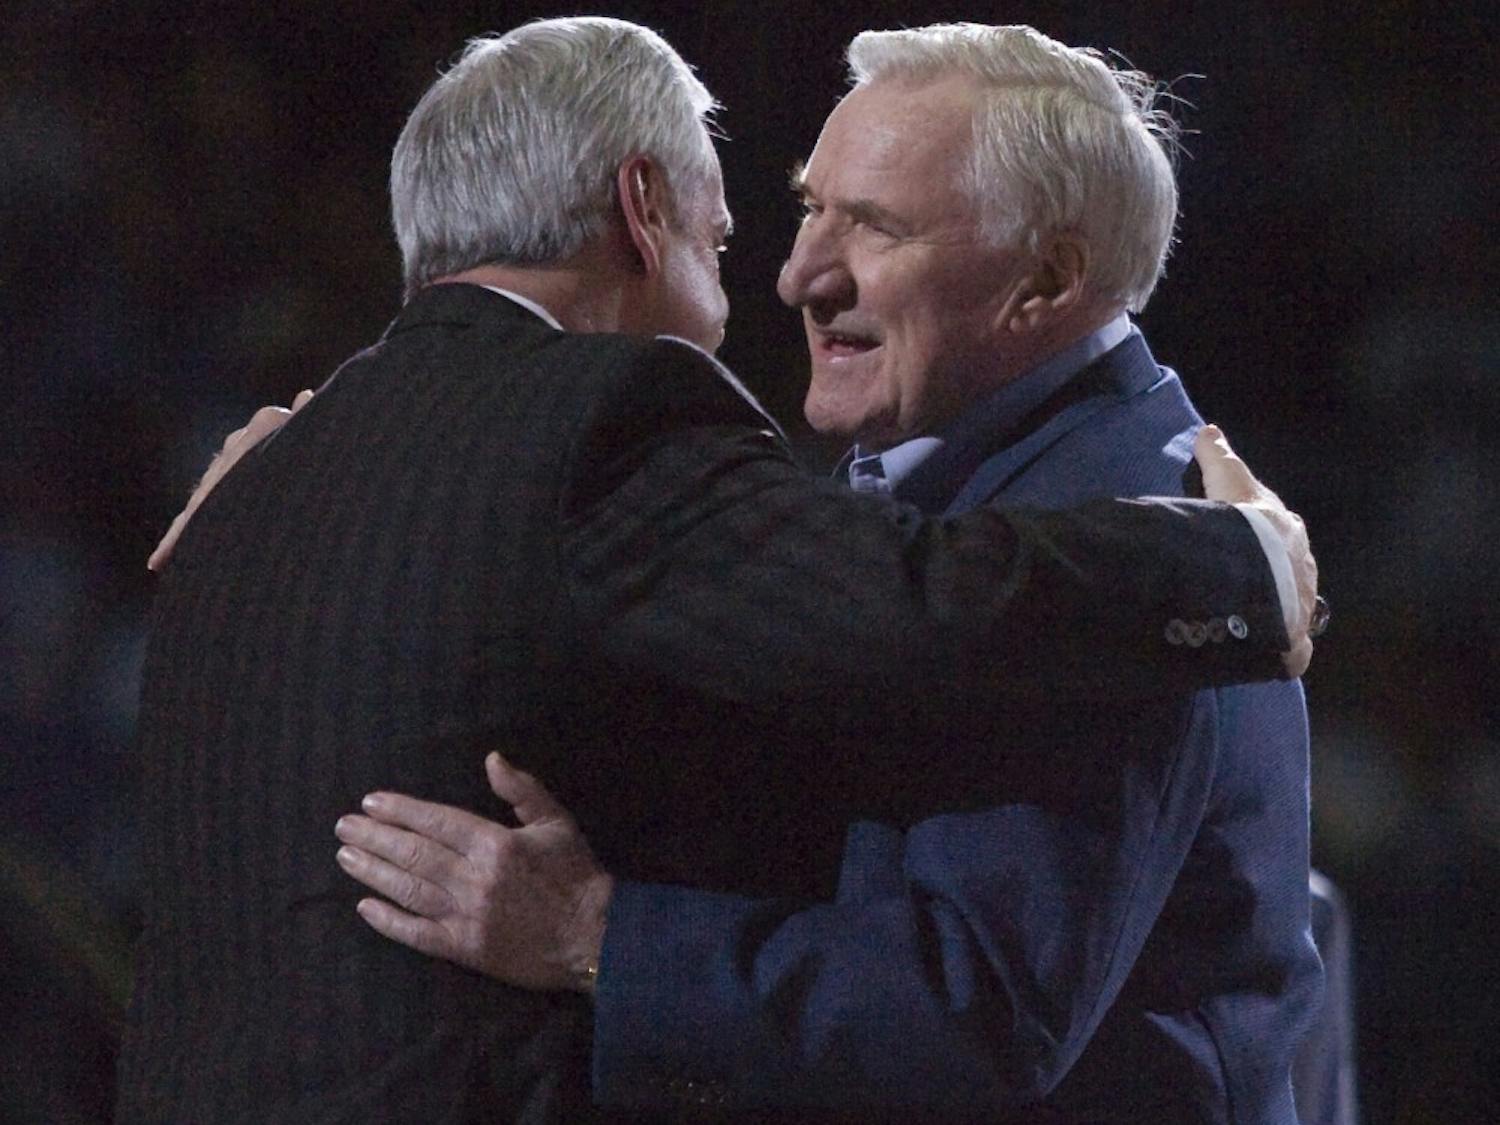 University of North Carolina coach Roy Williams, left, embraces former coach Dean Smith during the Celebration of a Century at the Smith Center in Chapel Hill, North Carolina, Friday, February 12, 2010. This is the 100th year of Carolina basketball. (Robert Willett/Raleigh News &amp; Observer/MCT)